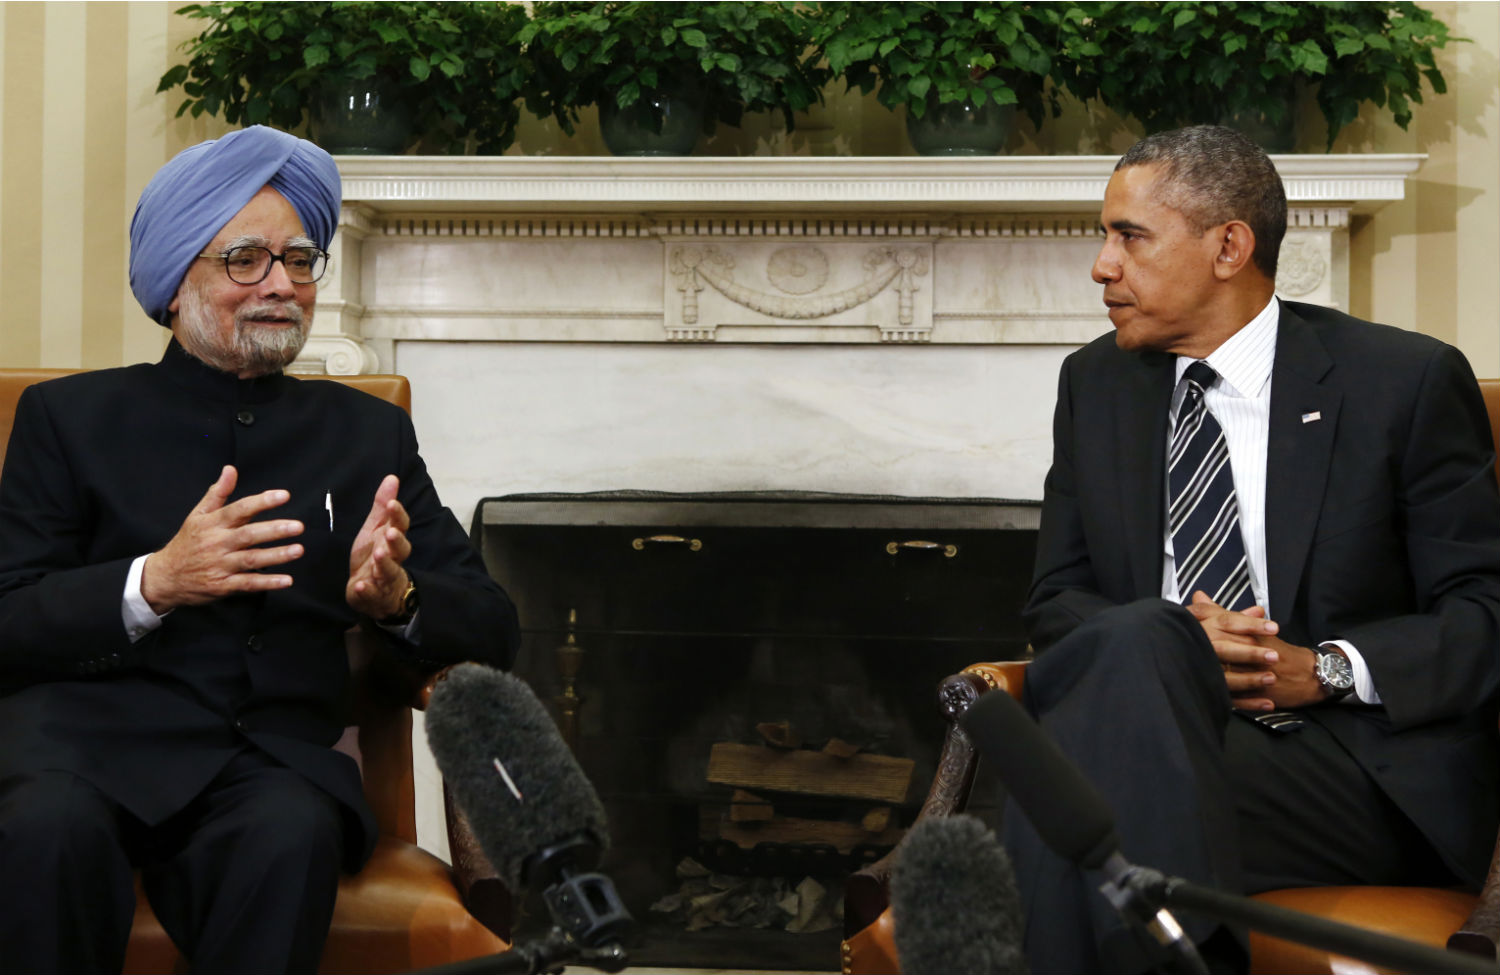 A Rocky Year May Lie Ahead for India-US Ties